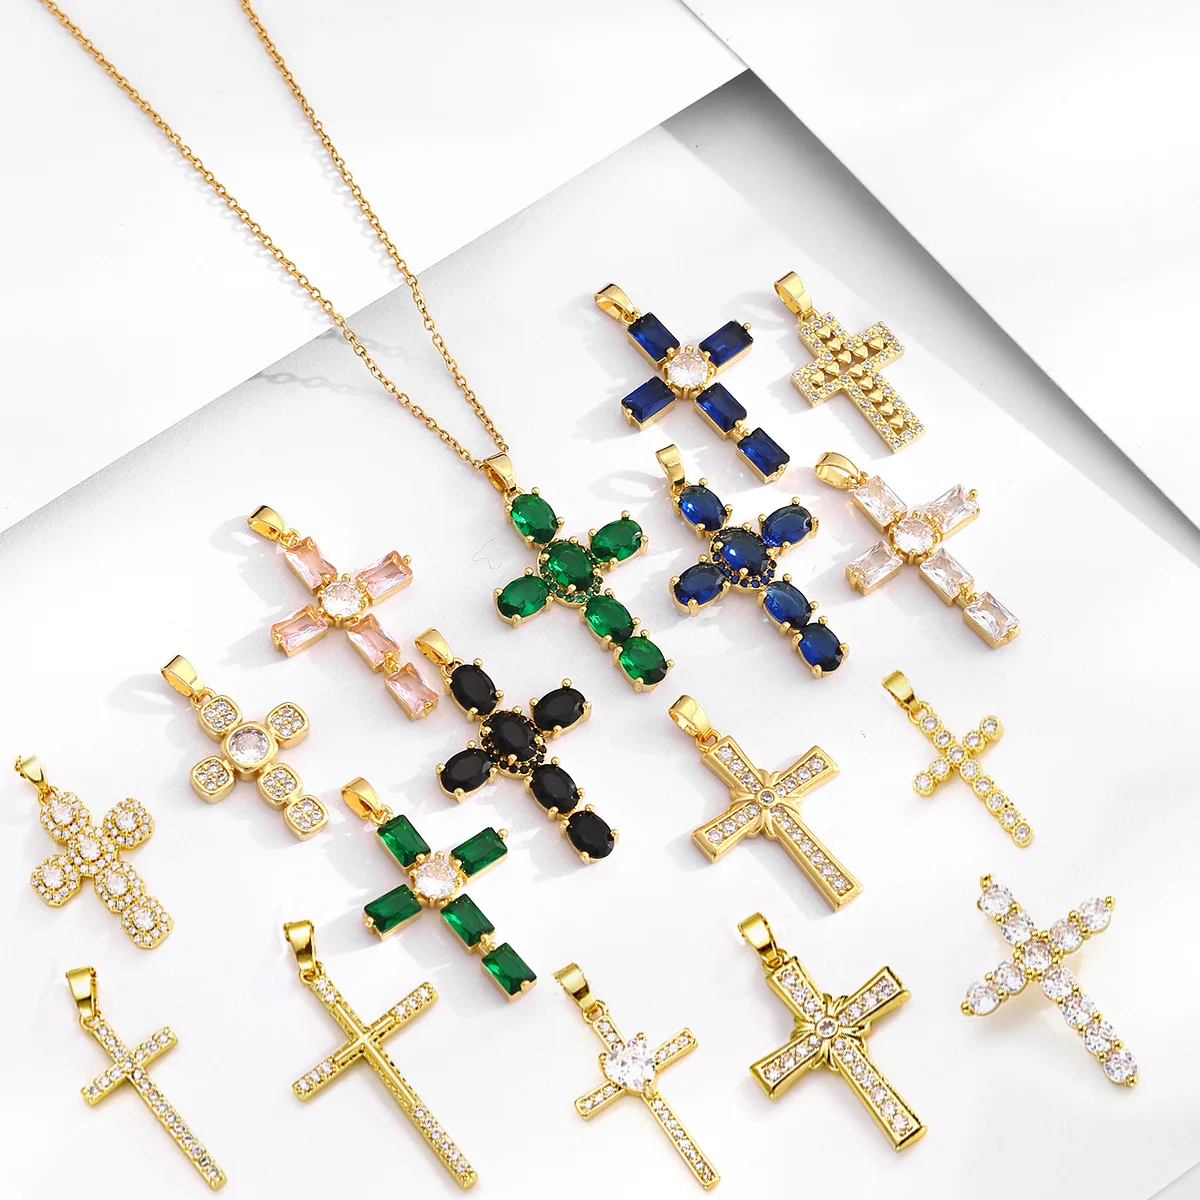 

Crystal Diamond Christian Religion Jewelry Gold Plated Stainless Steel Chain Cubic Zircon Cross Pendant Necklace